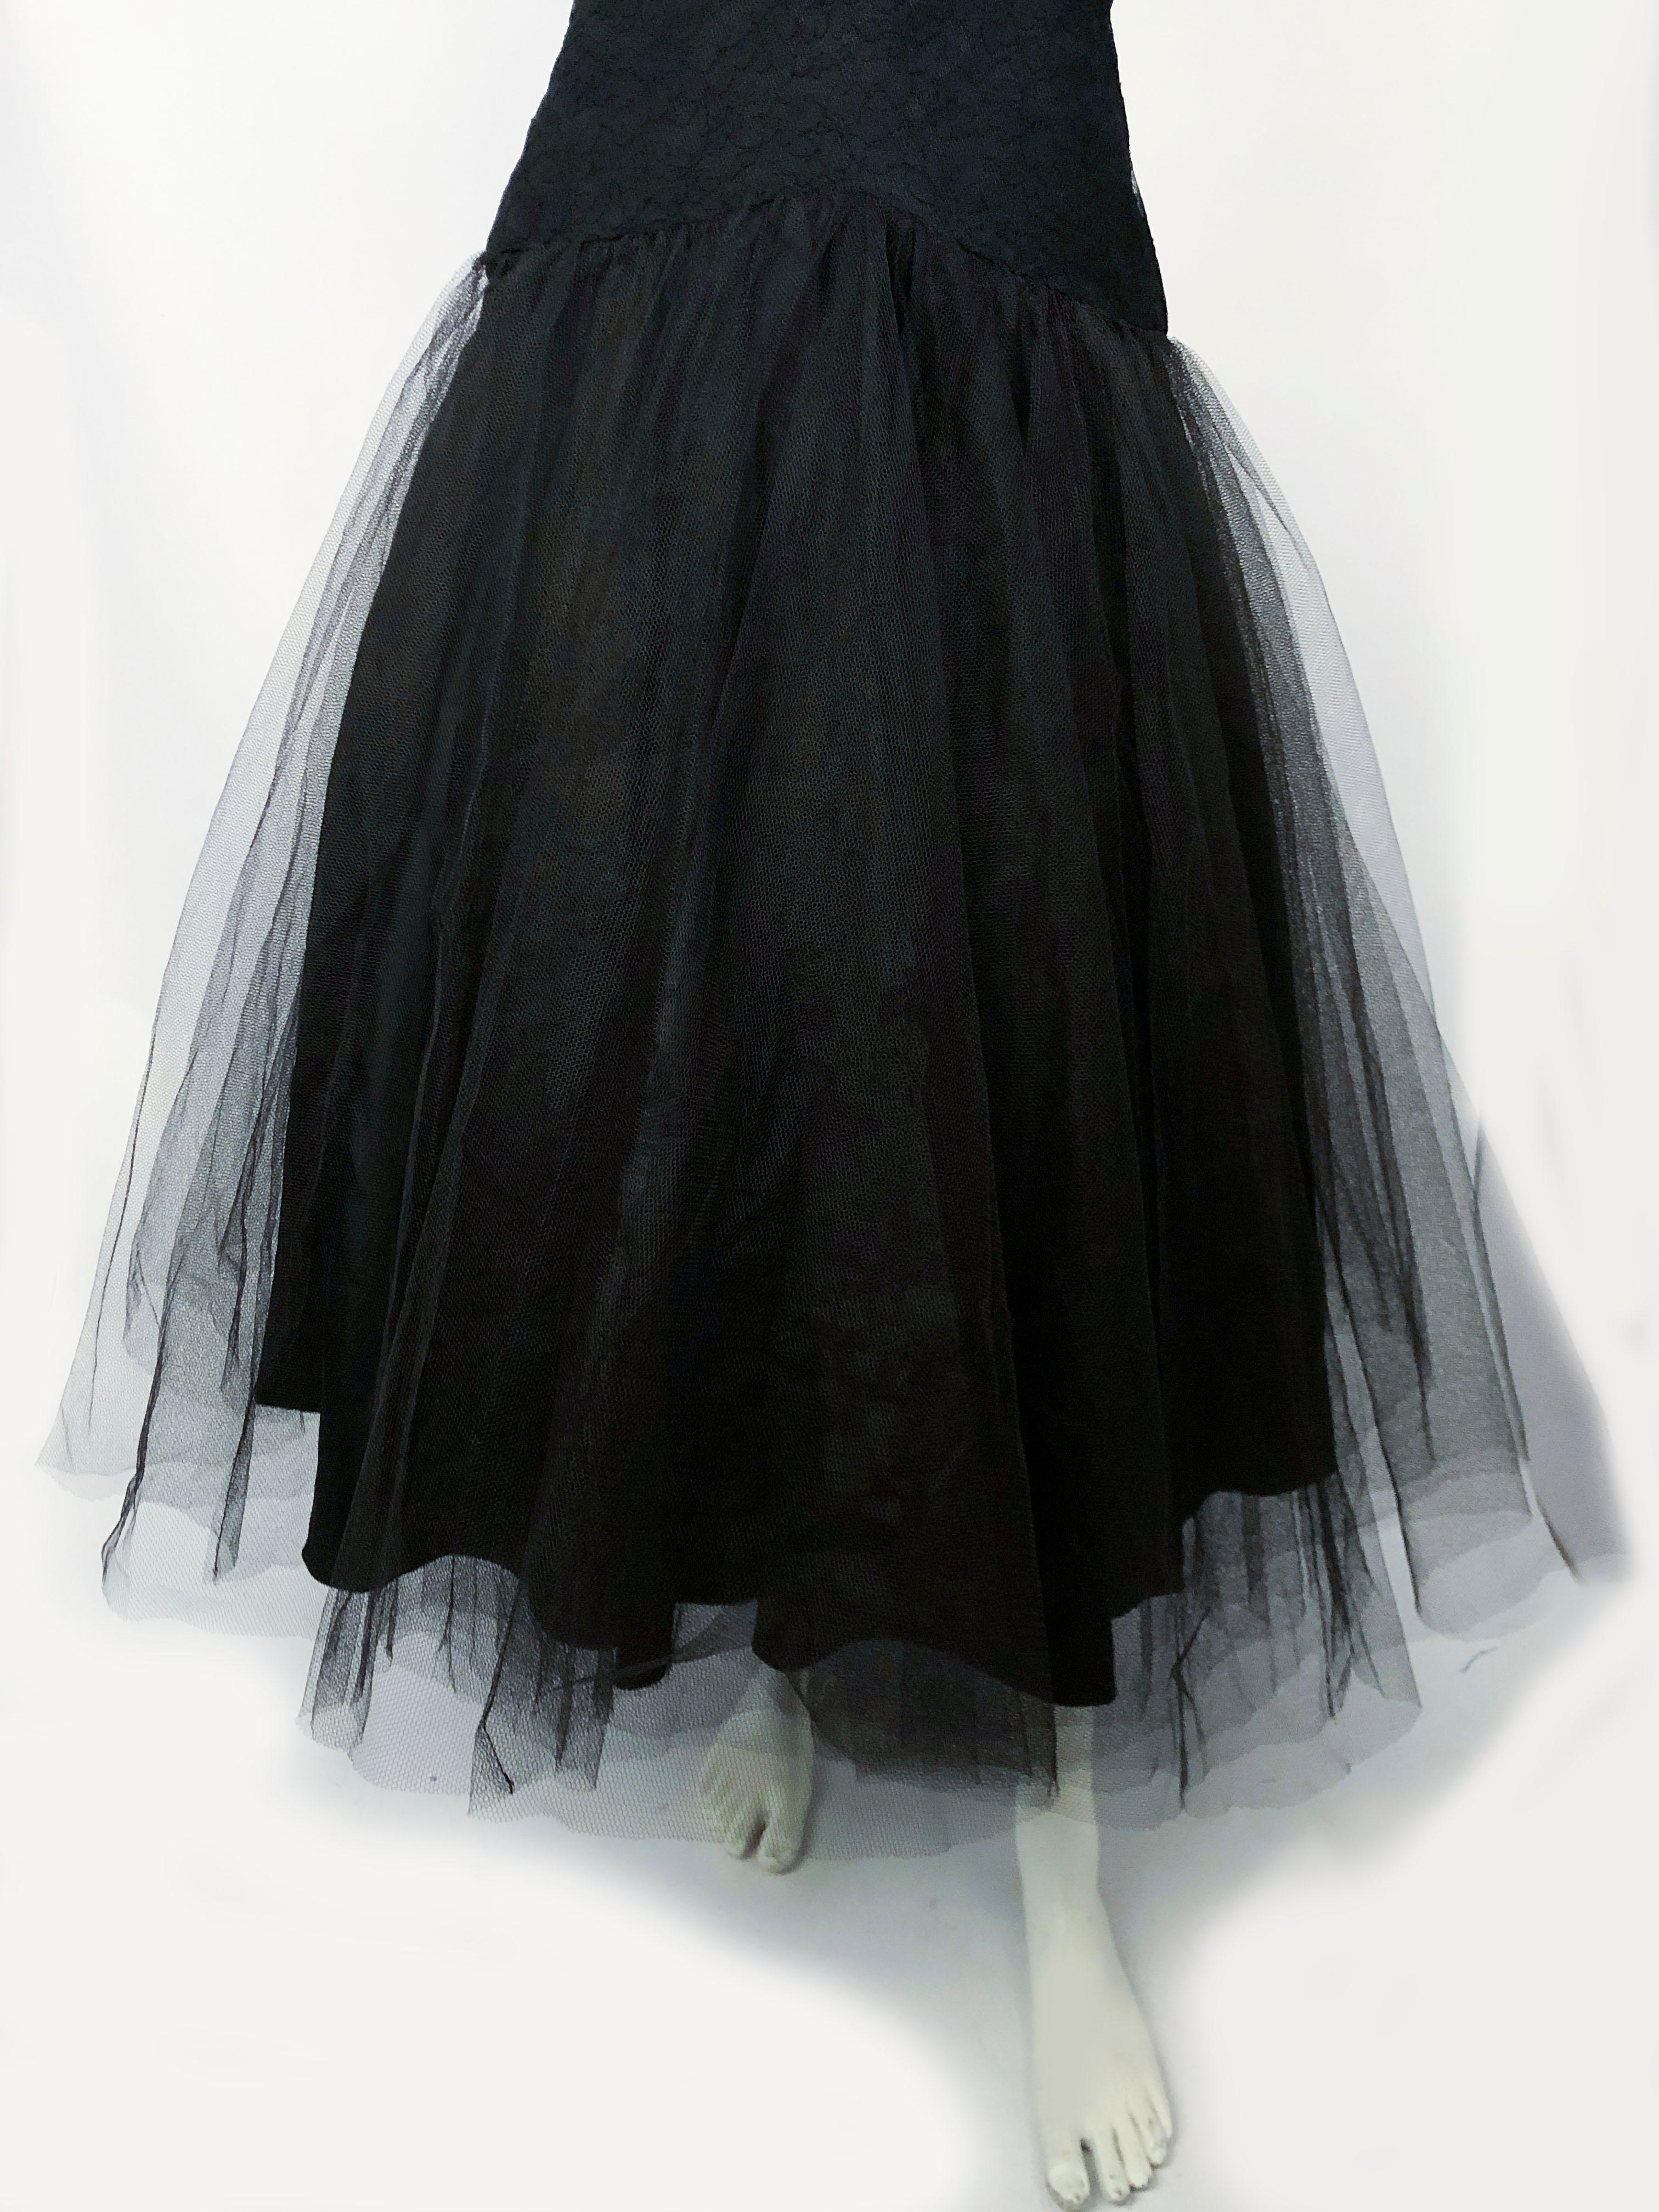 Black cocktail dress with a lace overlay on the bodes the is structured with layered racing and serves as a modesty panel. The drop-waist is accentuated by  a tule overskirt. The entire skirt is lined with a black taffeta. 